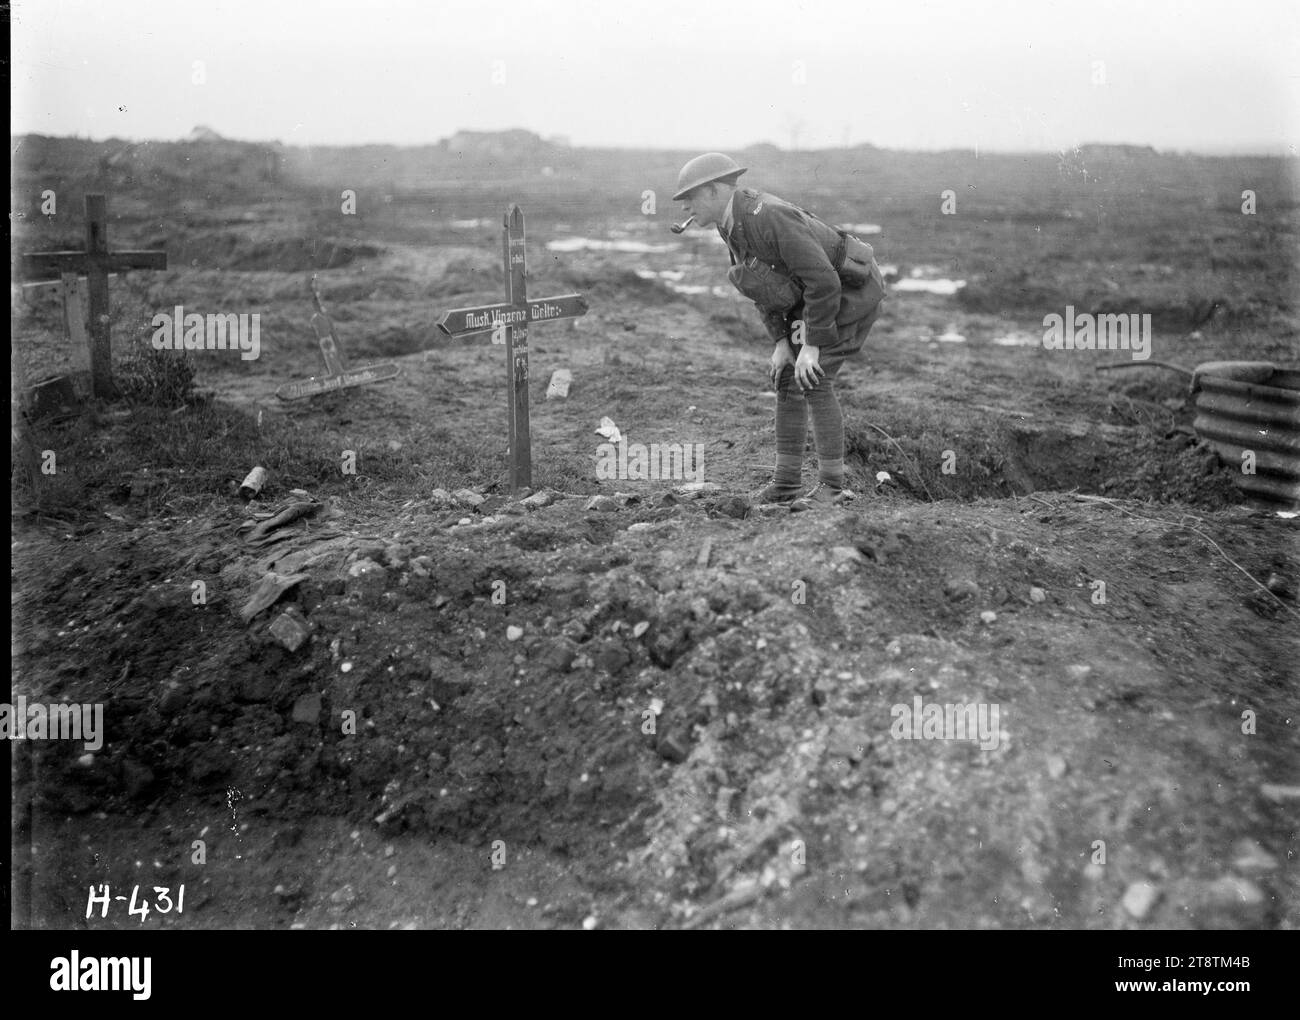 A New Zealand officer reads a cross in a former German field cemetery, World War I, A New Zealand Artillery officer bends over to read the wooden cross marking a grave in a former German field cemetery that is now a target of German shelling in World War I. Water-filled shell holes can be seen in the background. There is also a broken wooden cross on the ground. Photograph taken at Westhoek Ridge 4 February 1918 Stock Photo